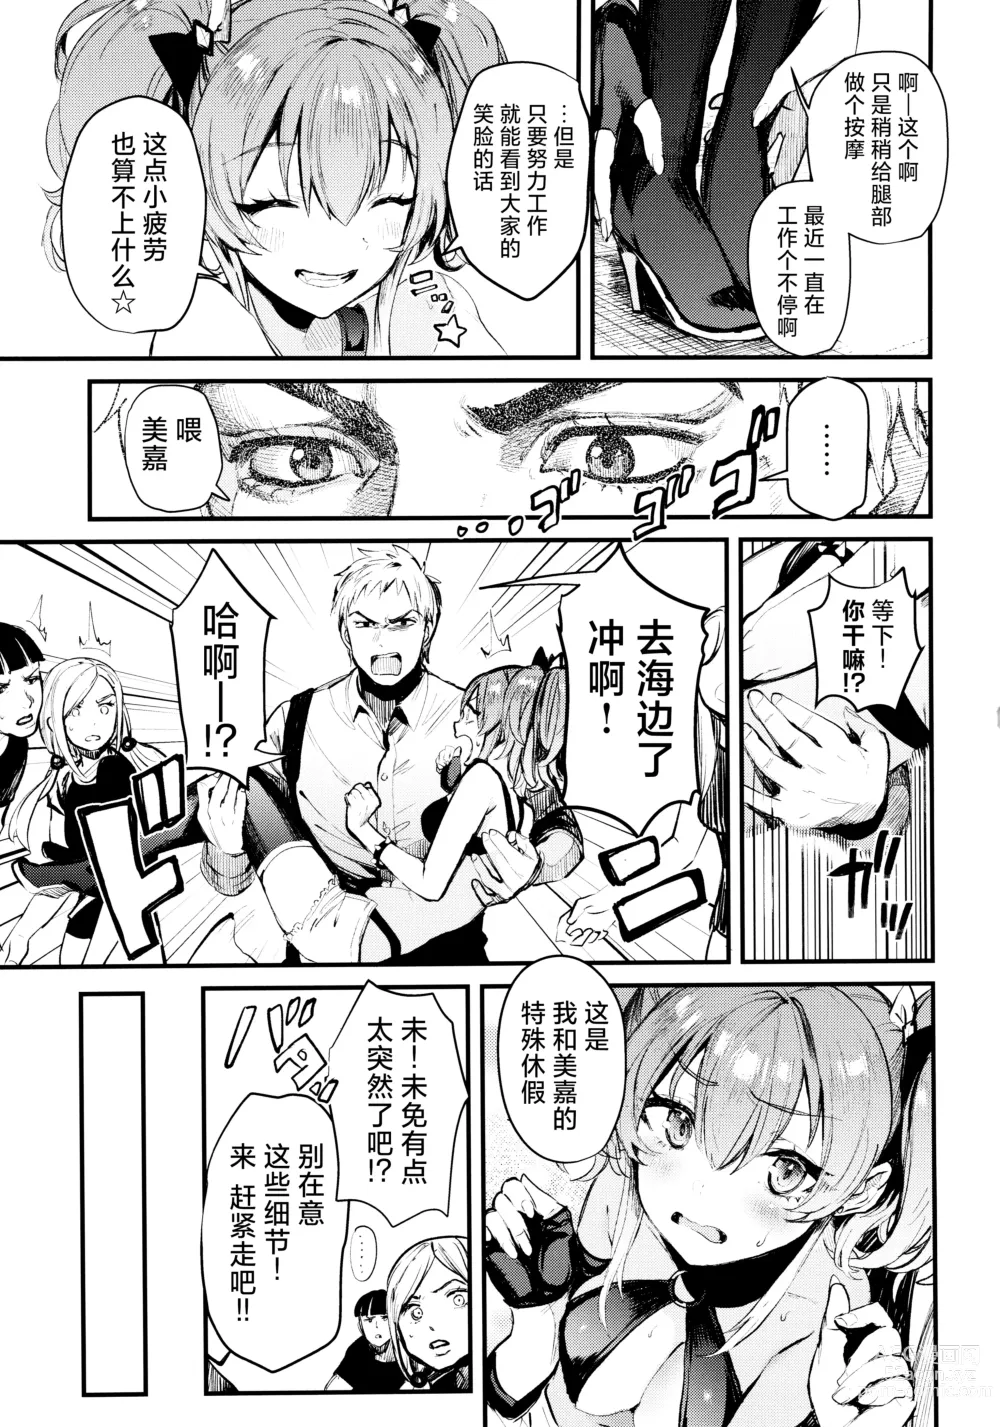 Page 7 of doujinshi 与美嘉两个人。